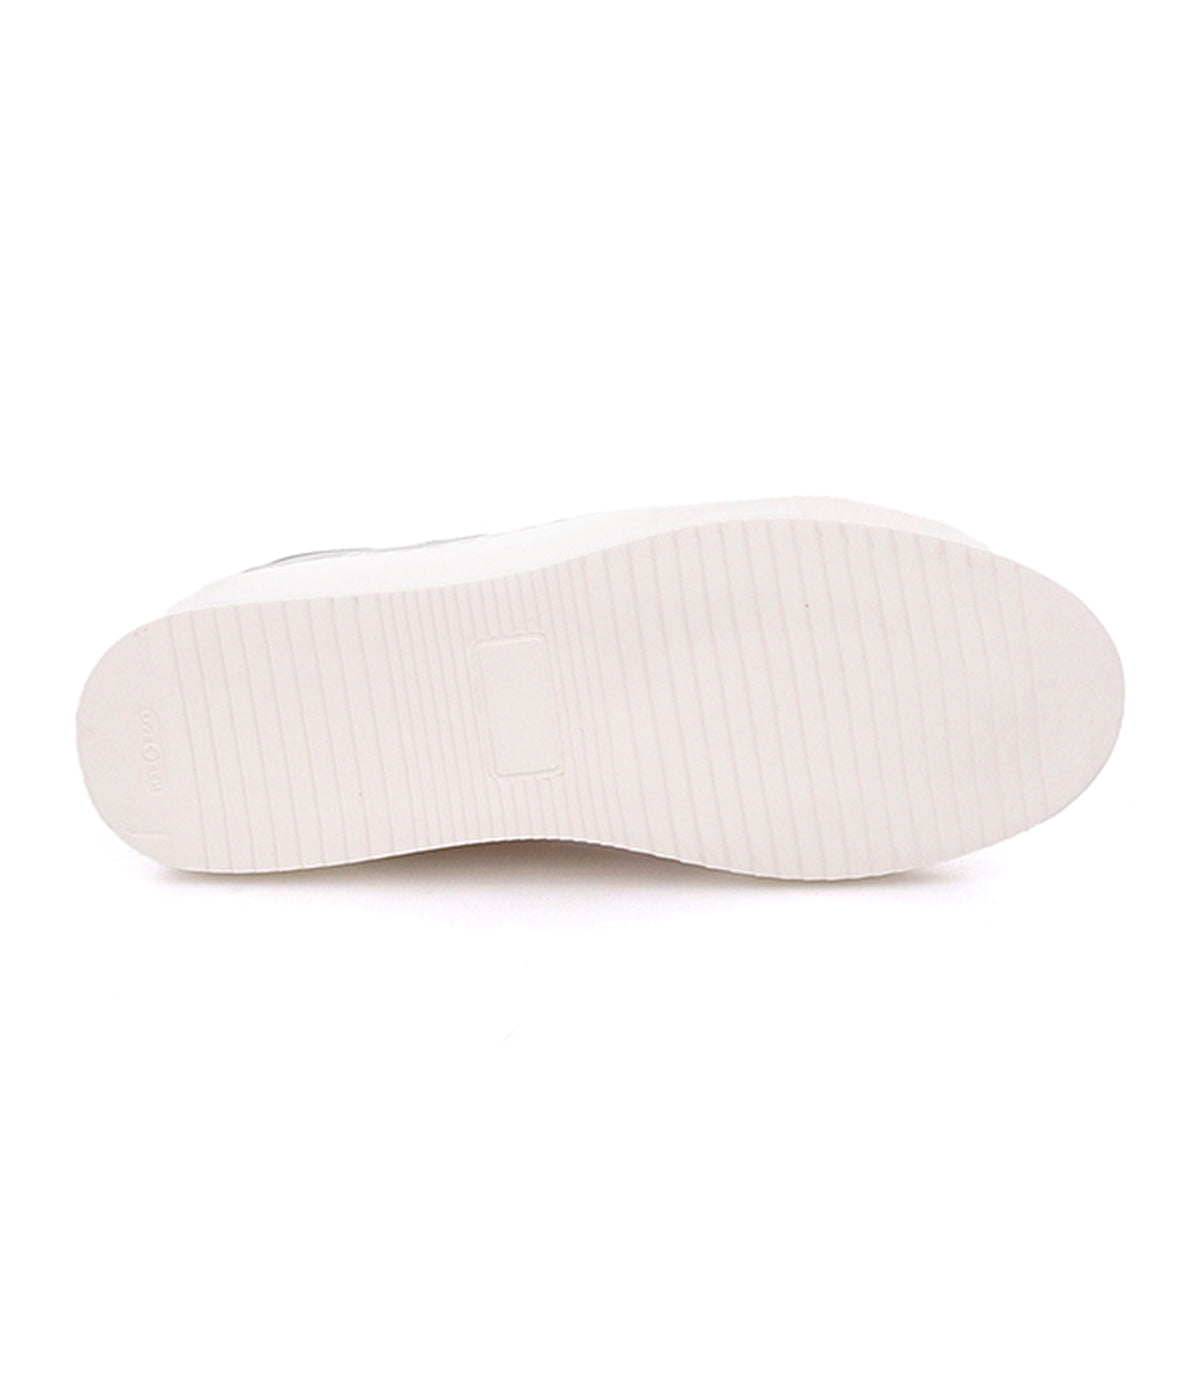 A stylish and comfortable white Azeli sneaker sole by Bed Stu.